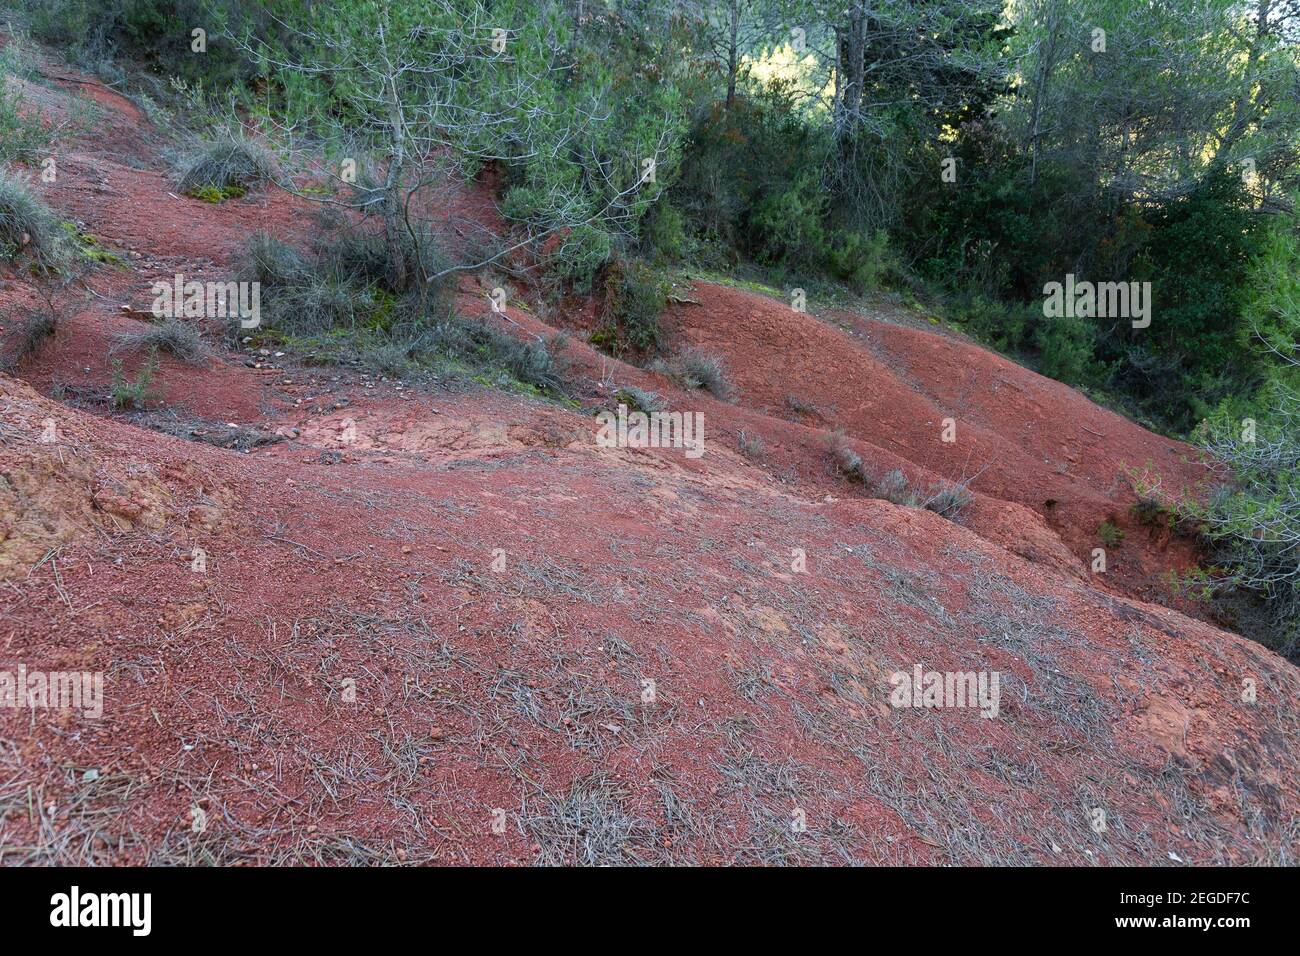 Red clay like soil, very fertile soil for planting, red dirt and forest. Landscape in the woods Stock Photo